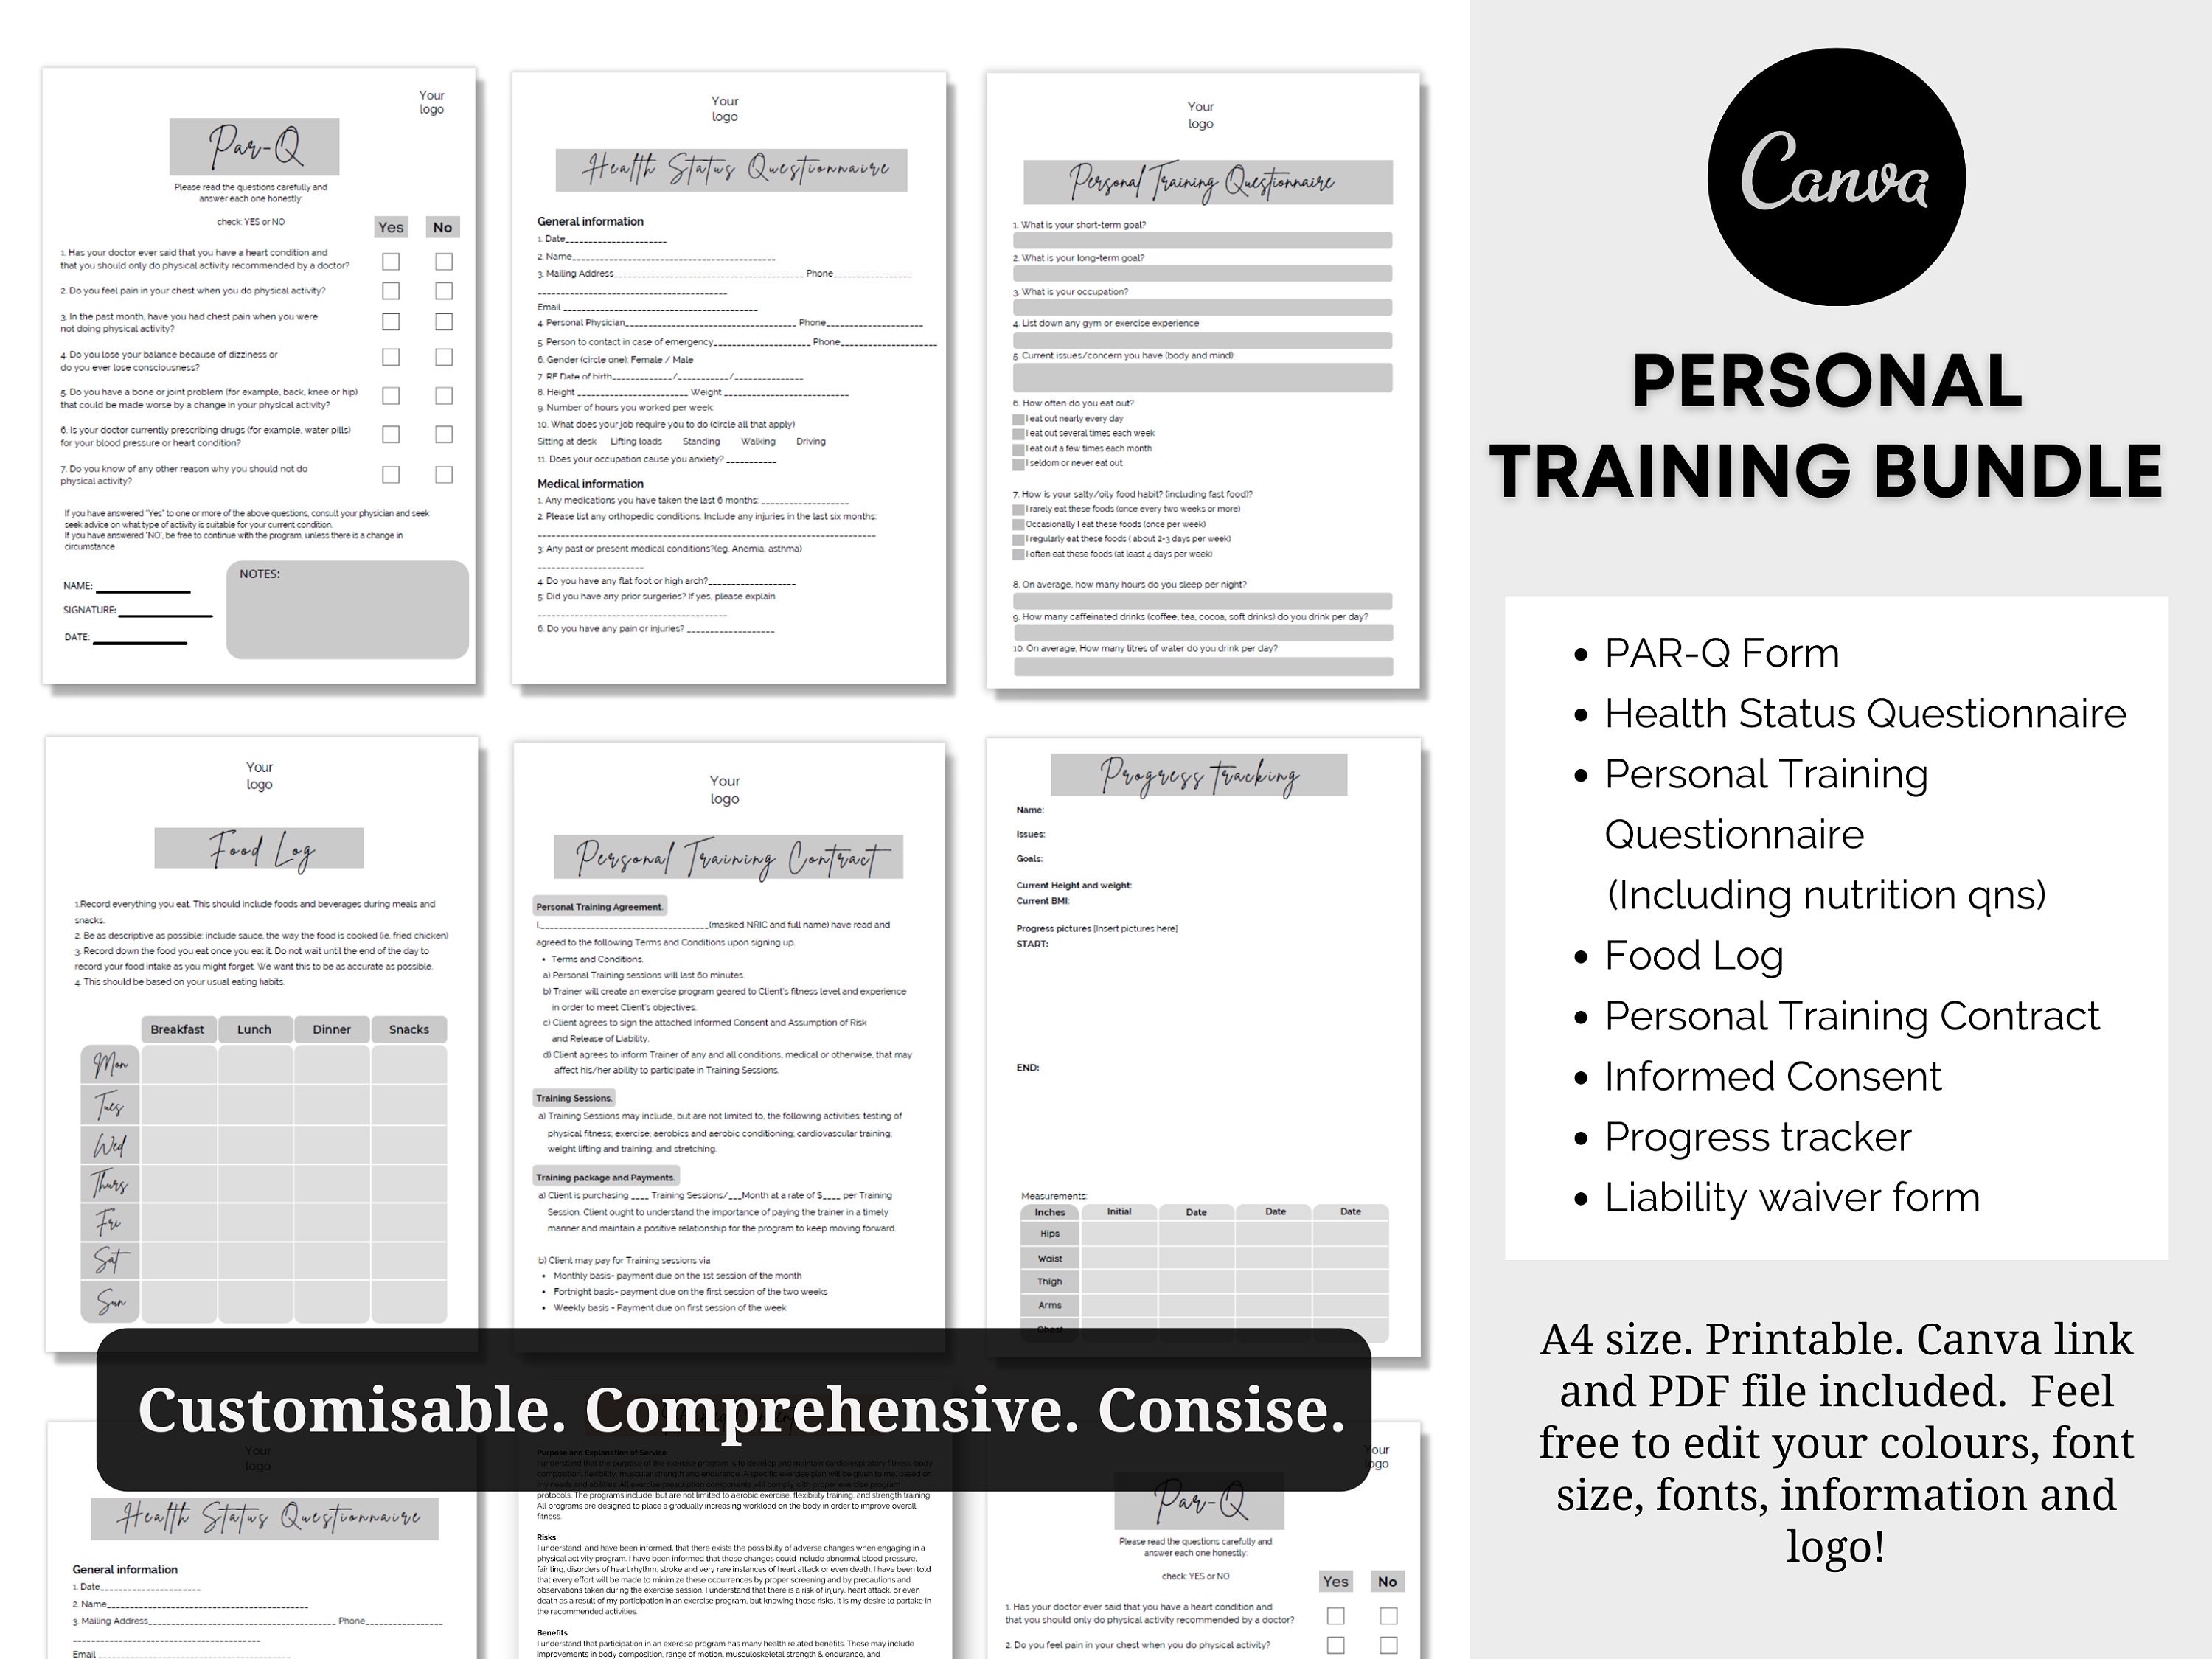 Free Personal Training Waiver and Release Form - PDF